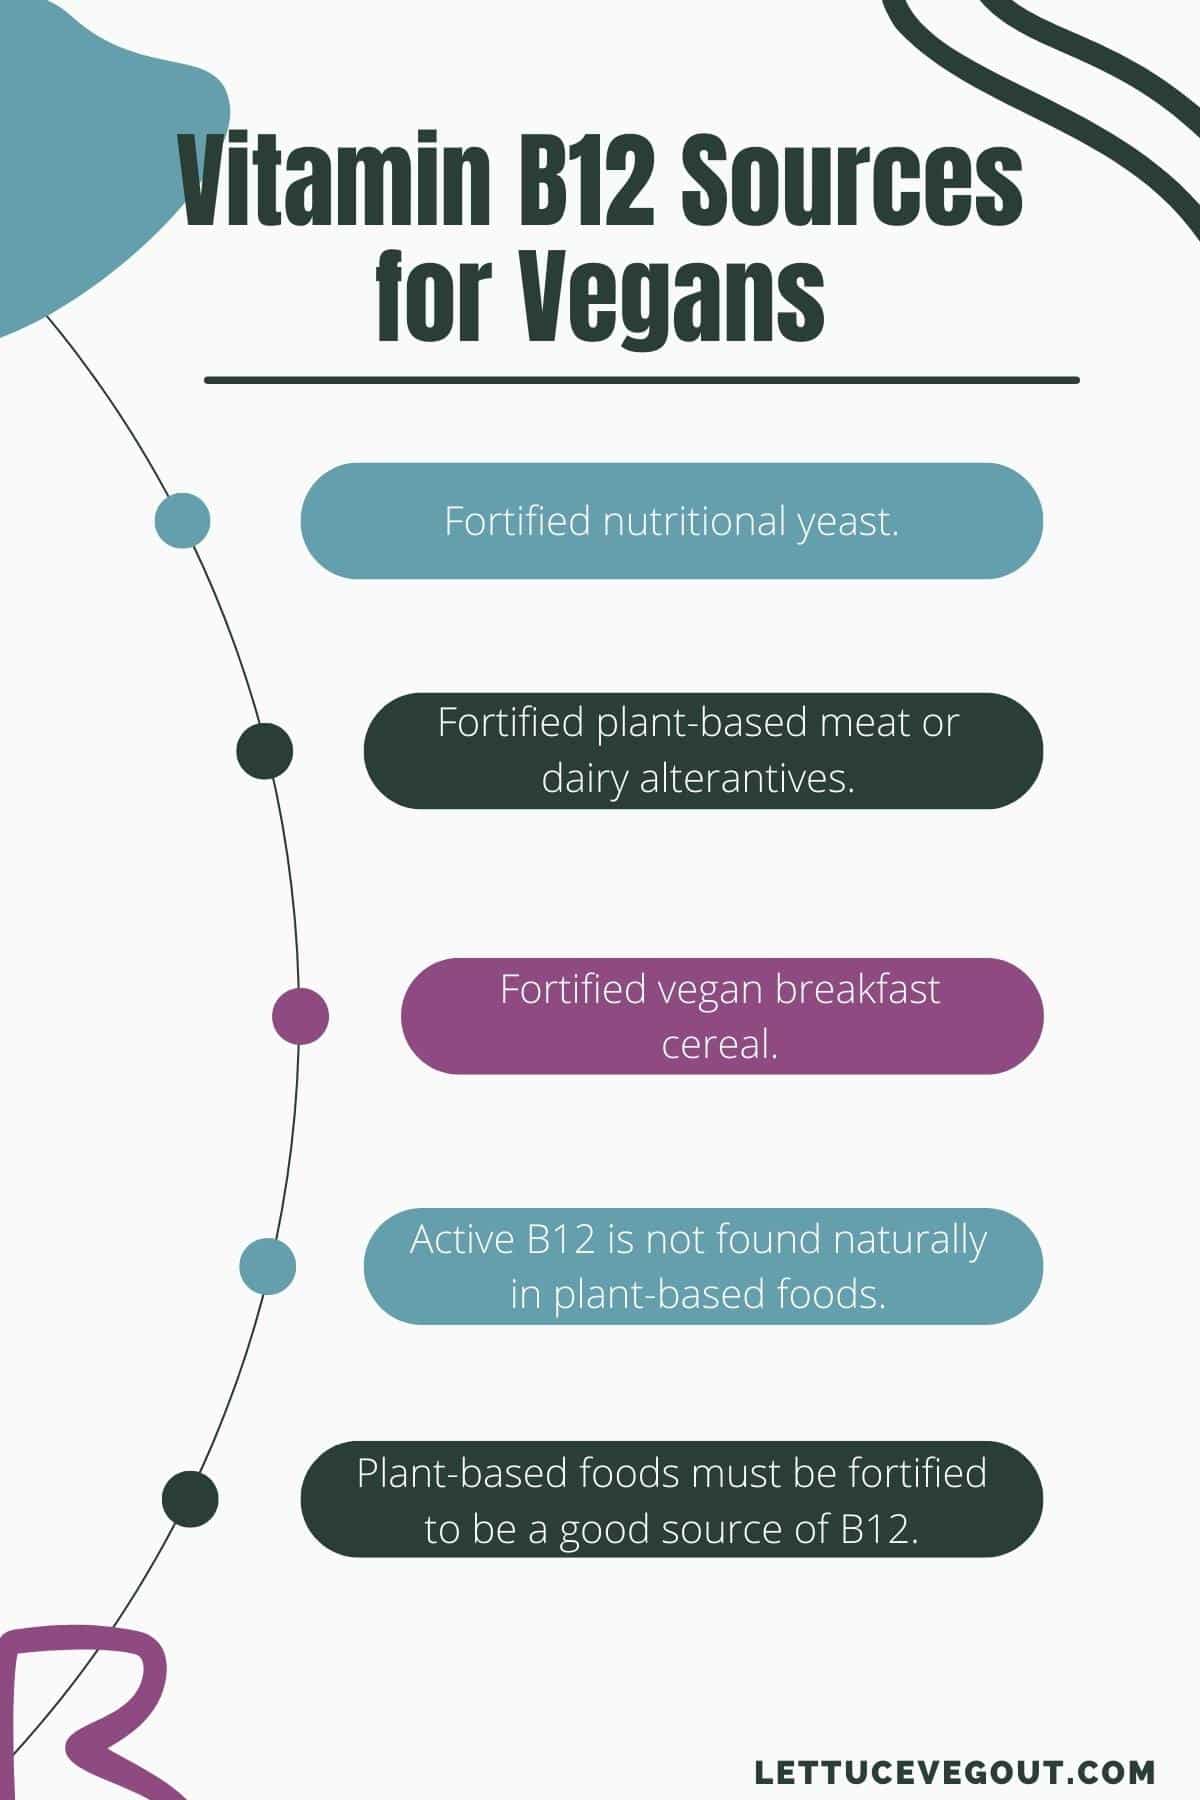 Infographic with list of vitamin B12 foods for vegans.